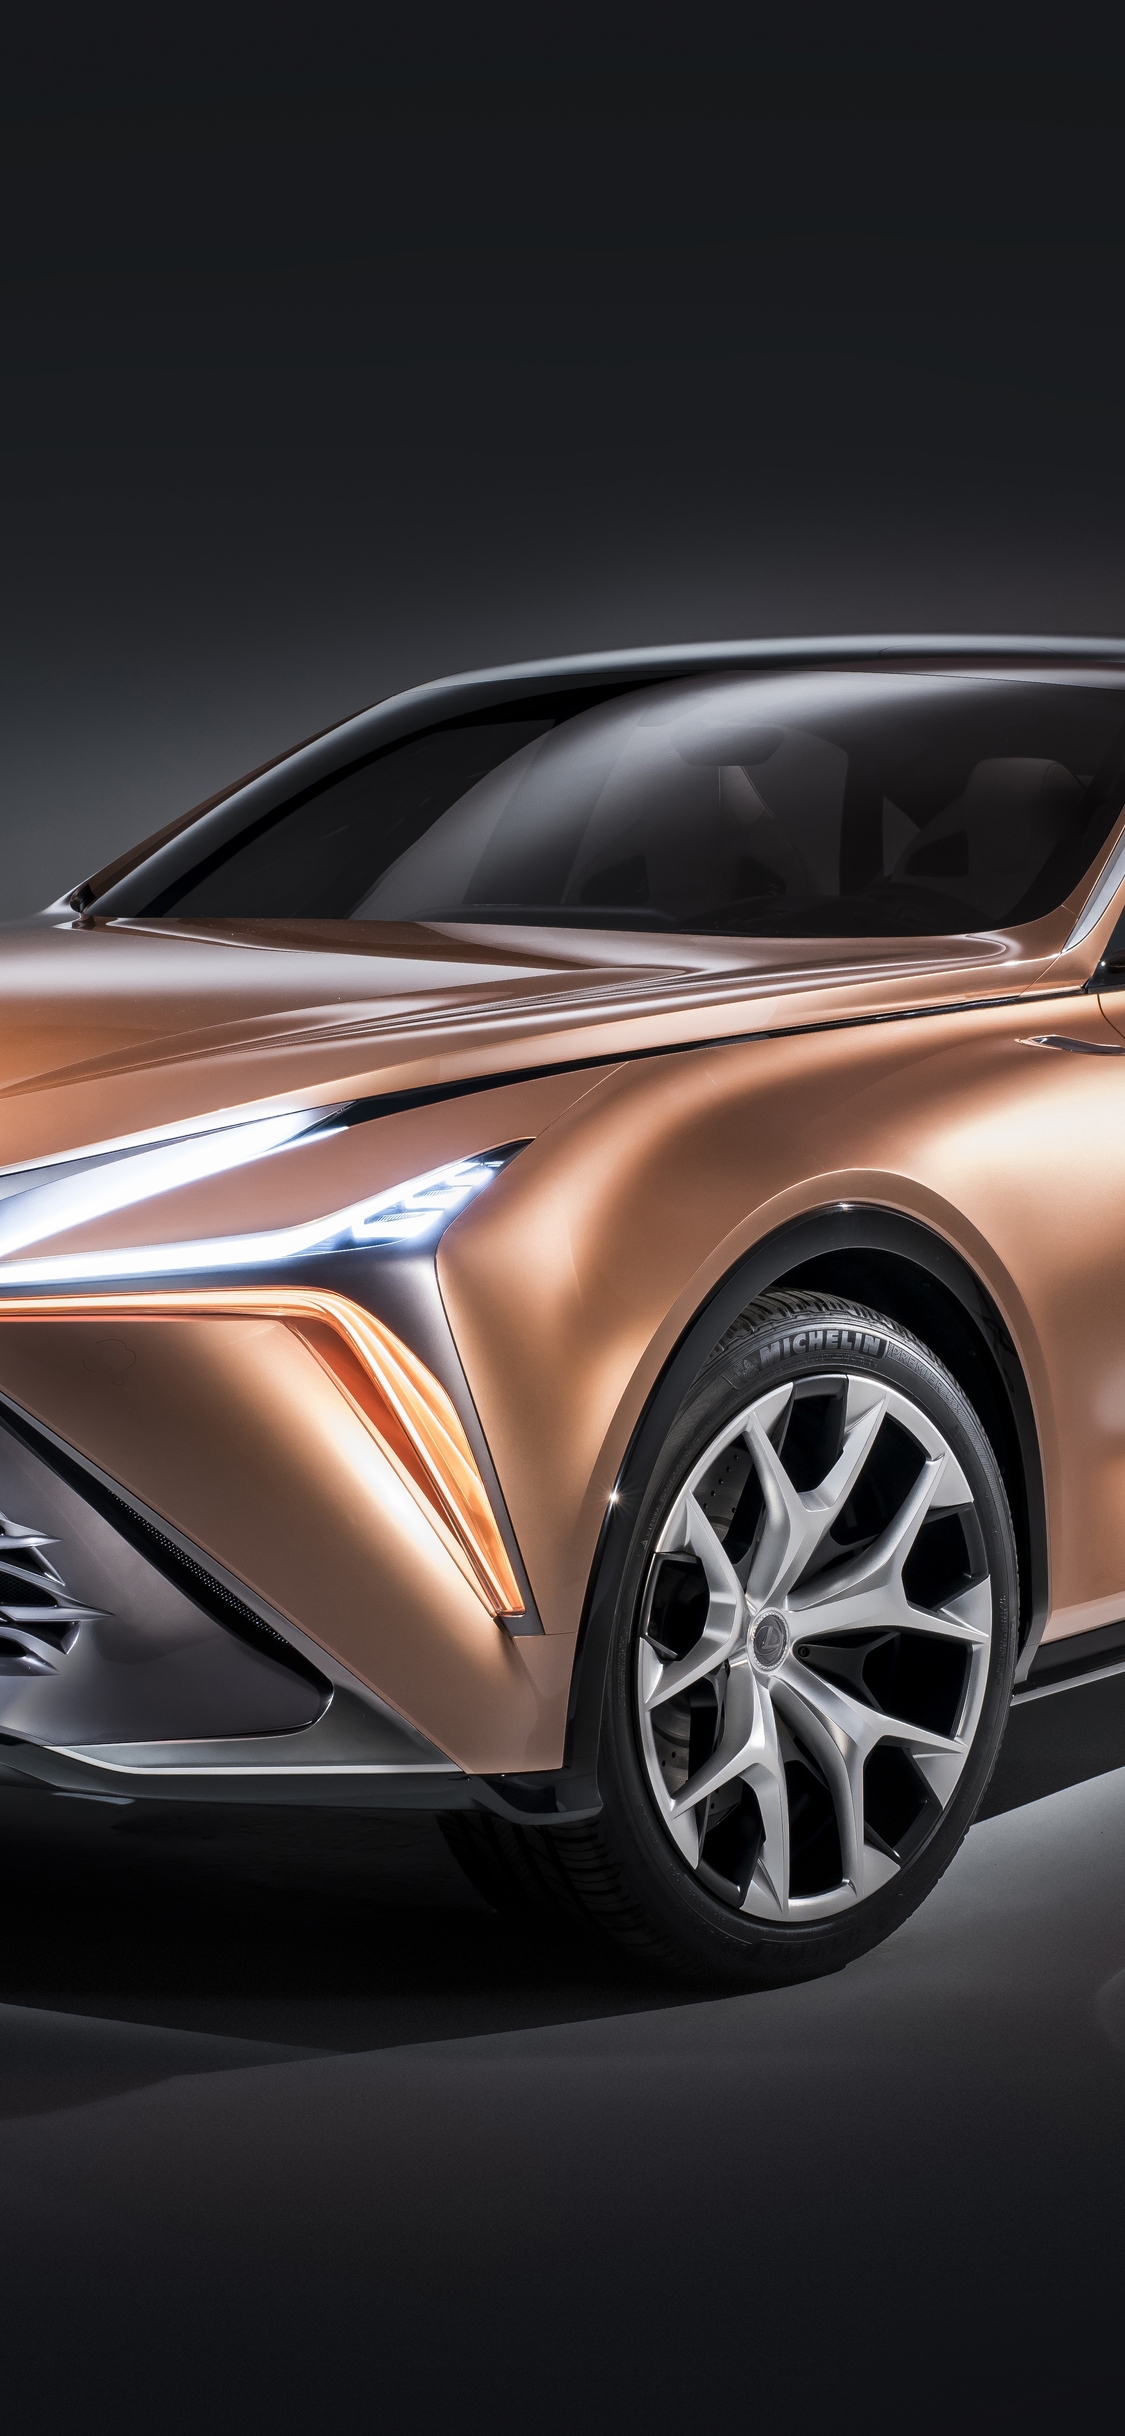 Image: Lexus, LF-1, Limitless, Concept, Crossover